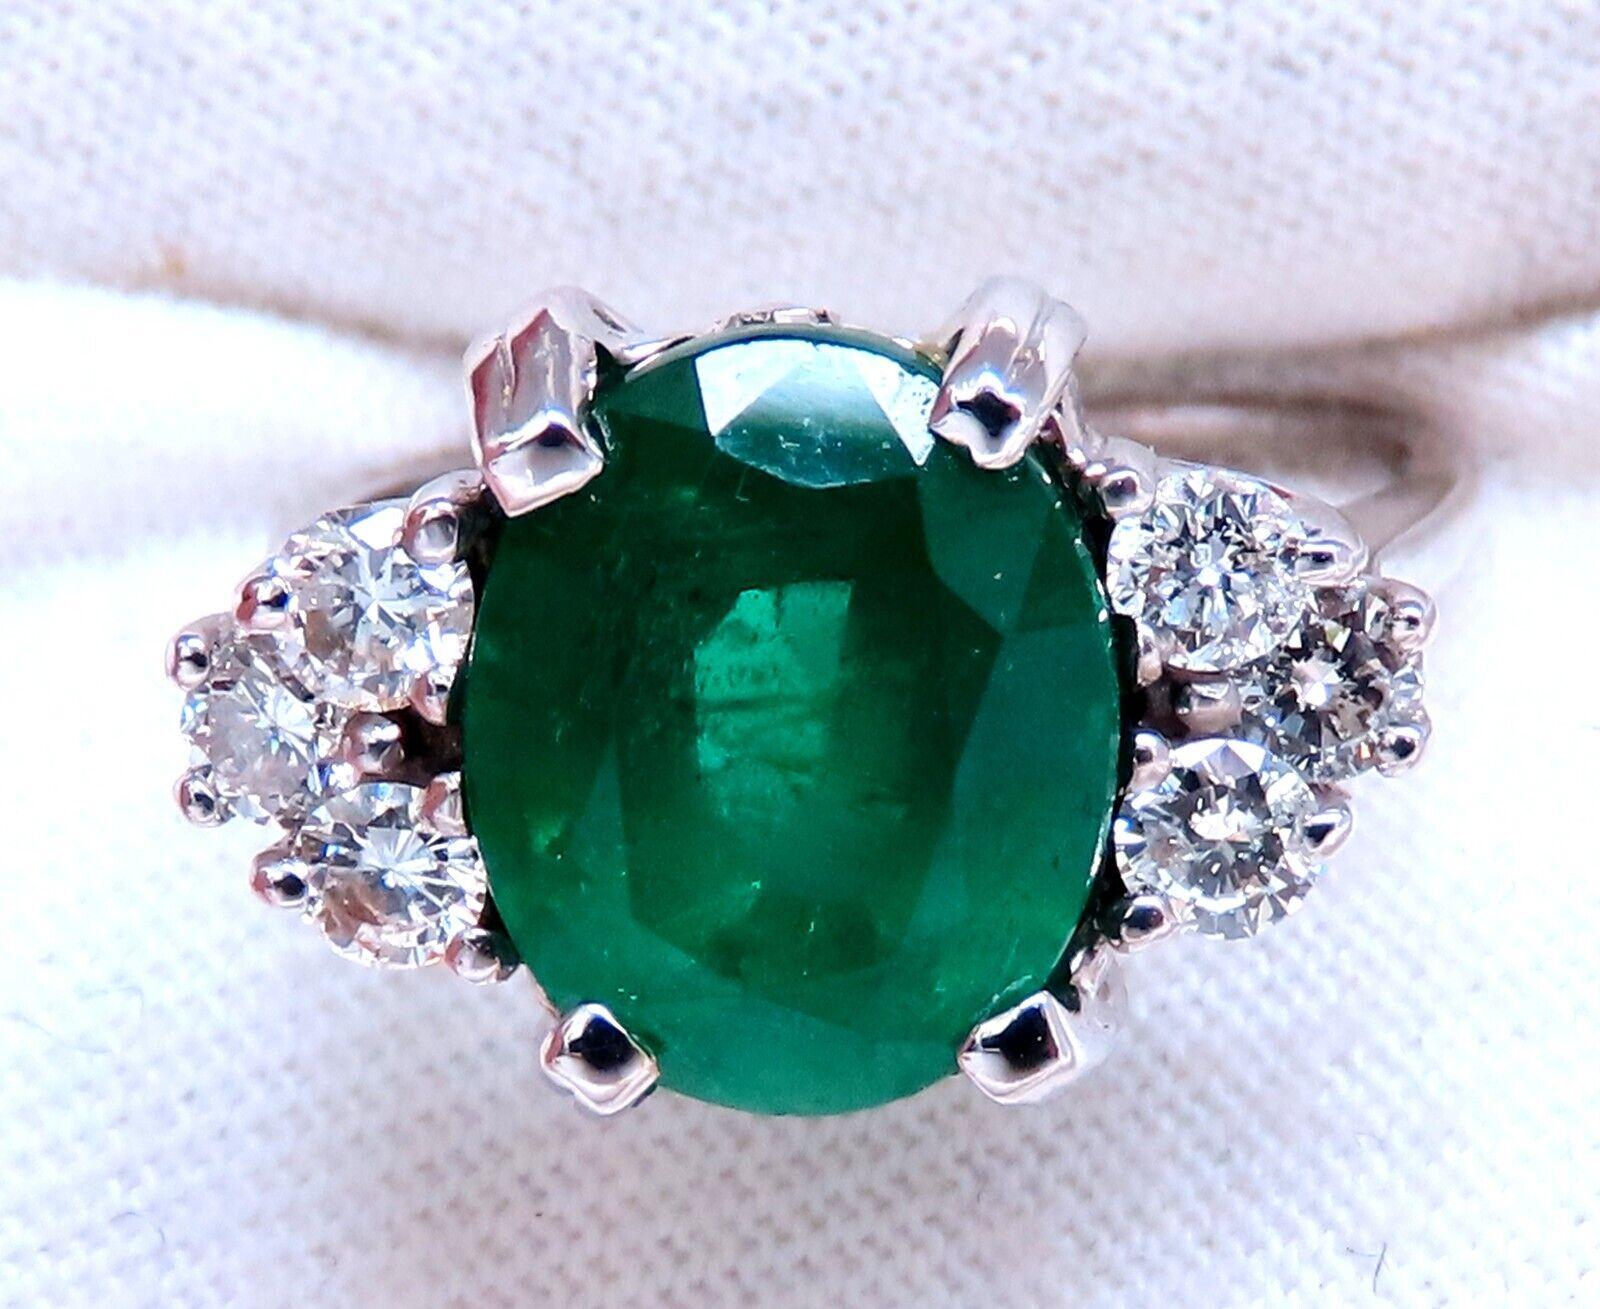 4.07ct Natural Oval emerald ring.

10 x 8mm emerald, even green clean clarity and transparent.

Oil Enhanced

.50 carat natural  round diamond

H-I color Si-1 Si-2 clarity

14 karat white gold 4.6 grams

Depth of ring 8 mm

Size 6 we may resize